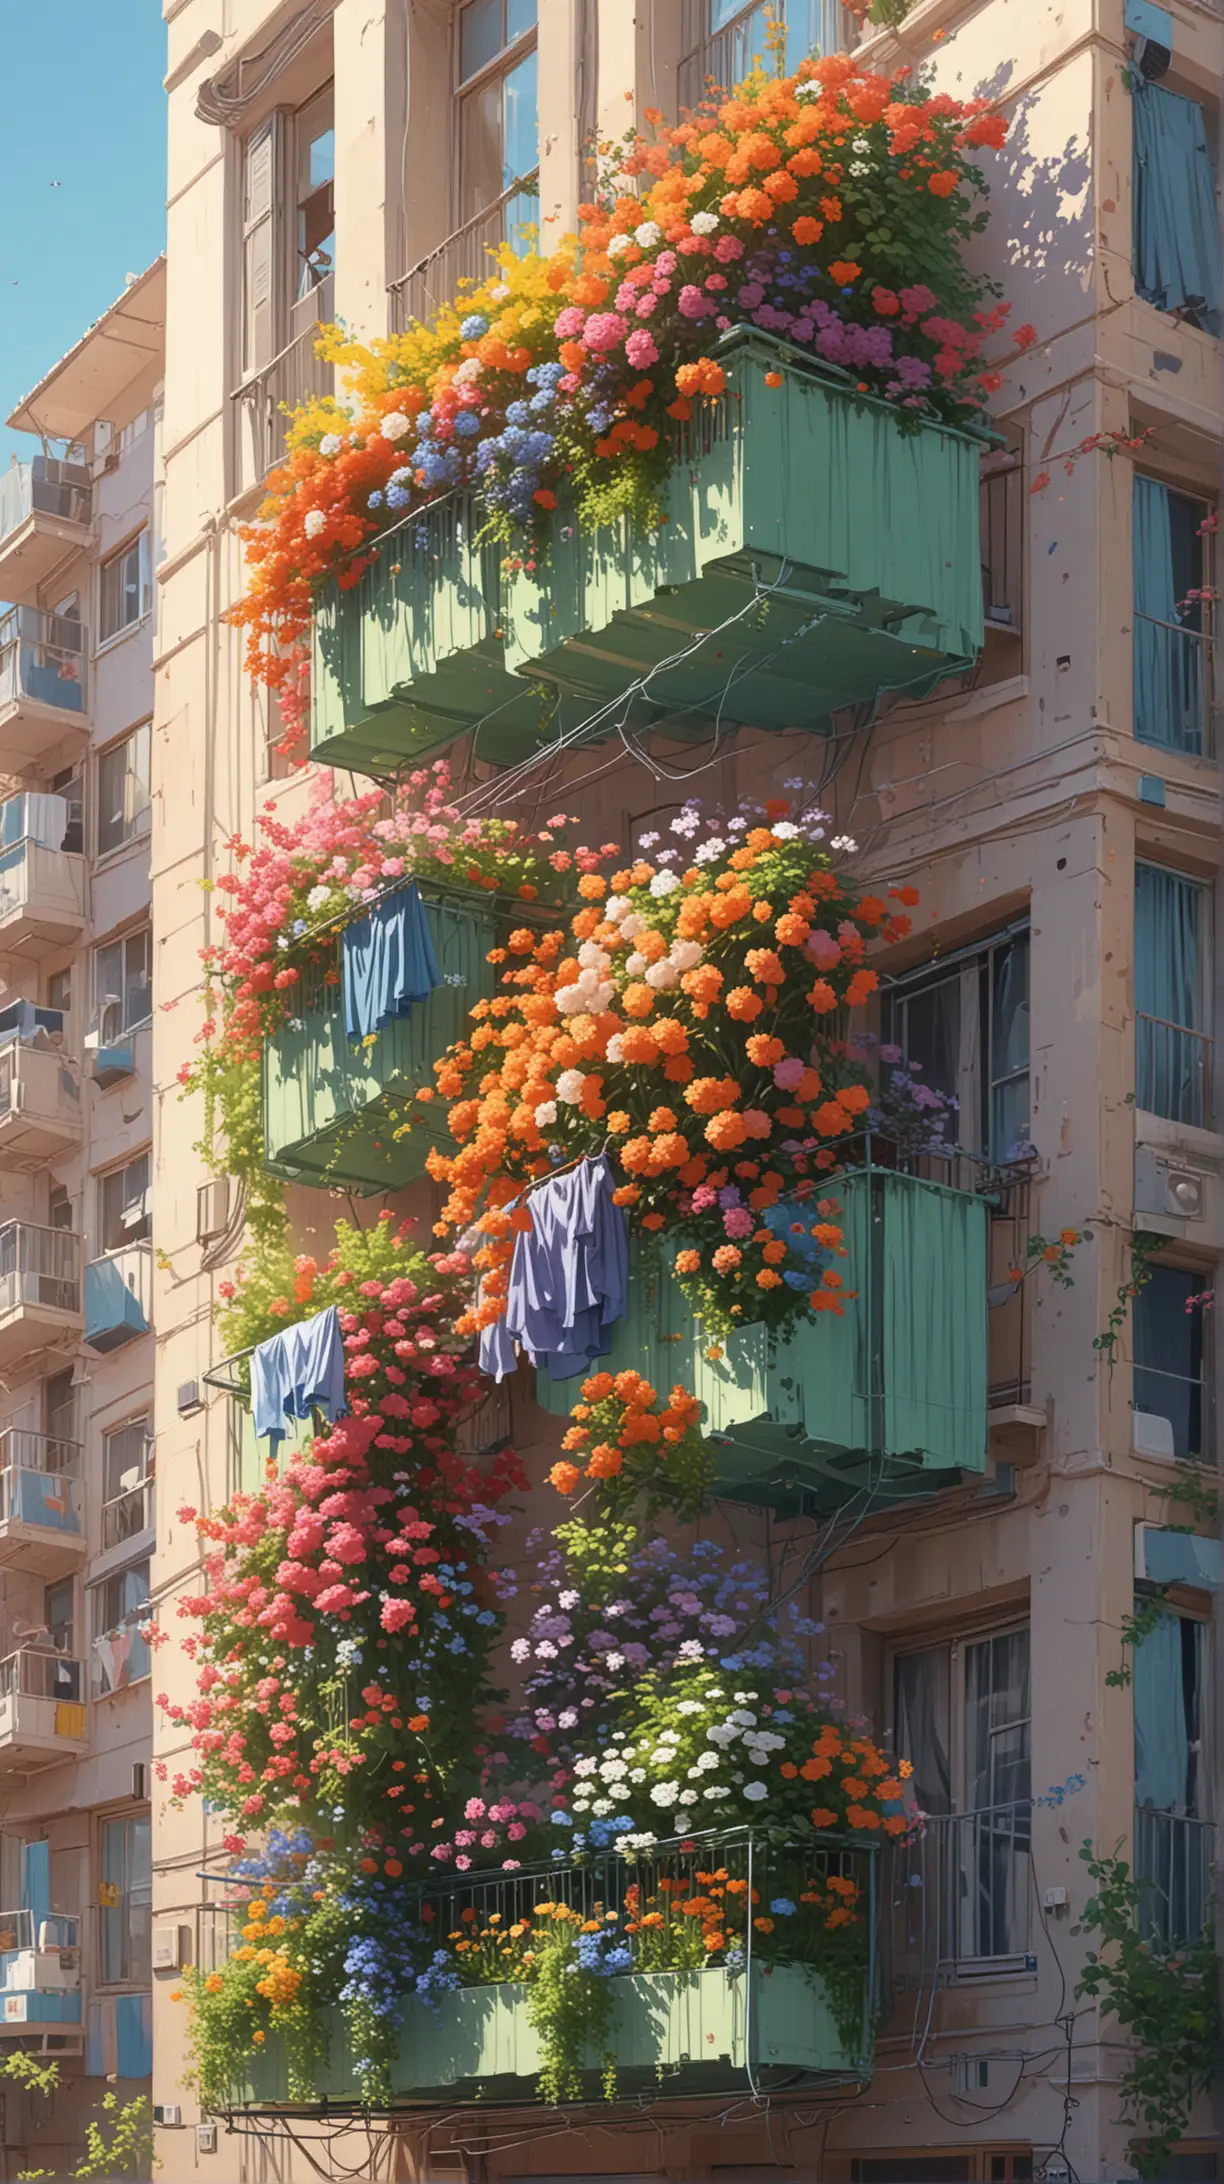 Animestyle Apartment Balconies with Vibrant Flowers and Laundry